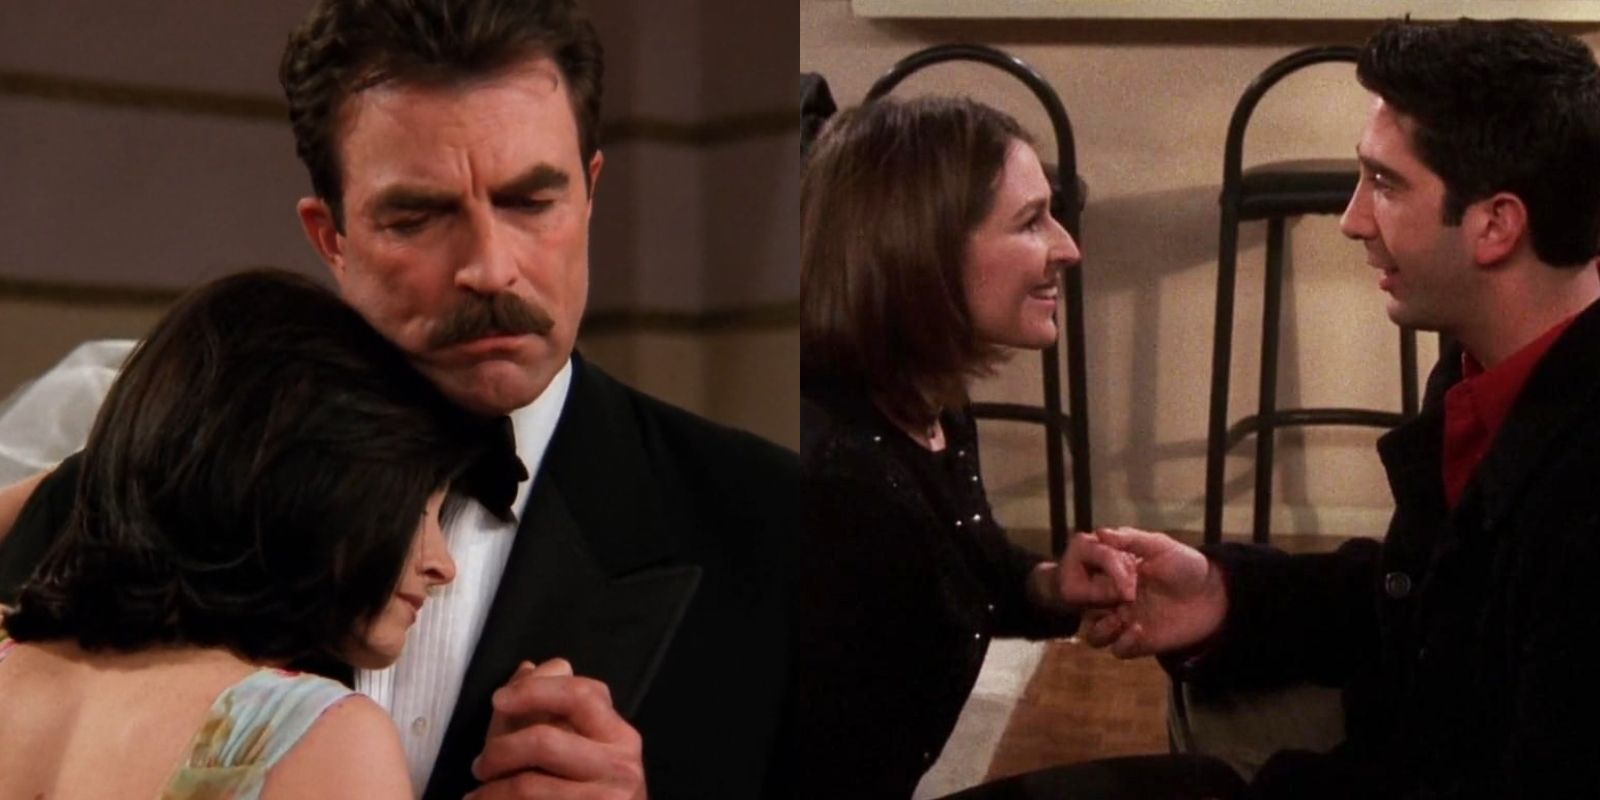 Two side by side images from Friends with Monica and Richard hugging and Ross and Emily holding hands.